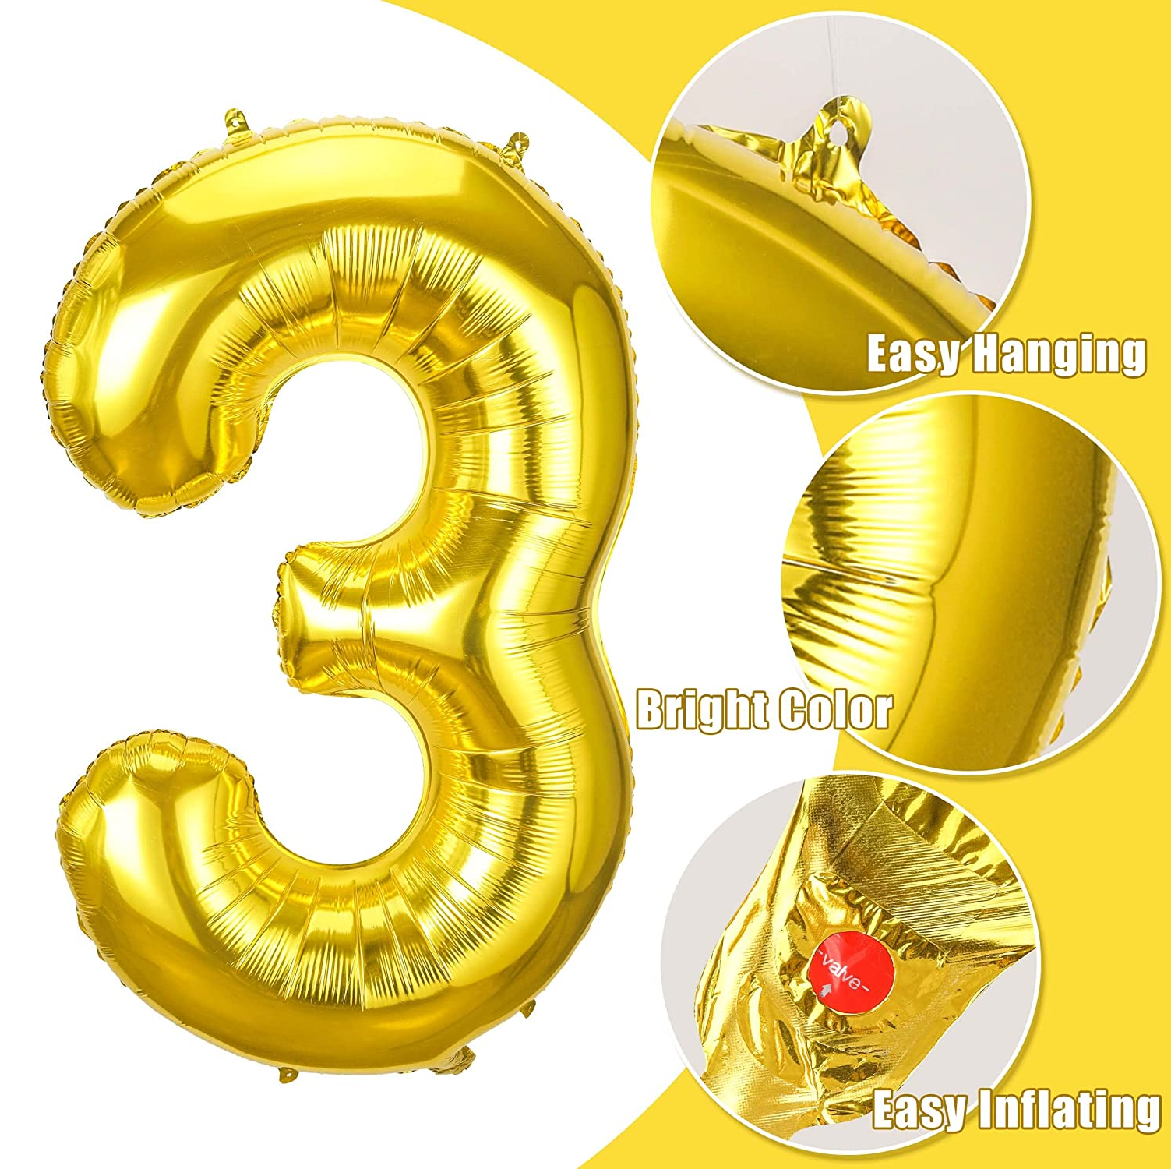 Party Decoration Balloon - 32 Inch Gold #3